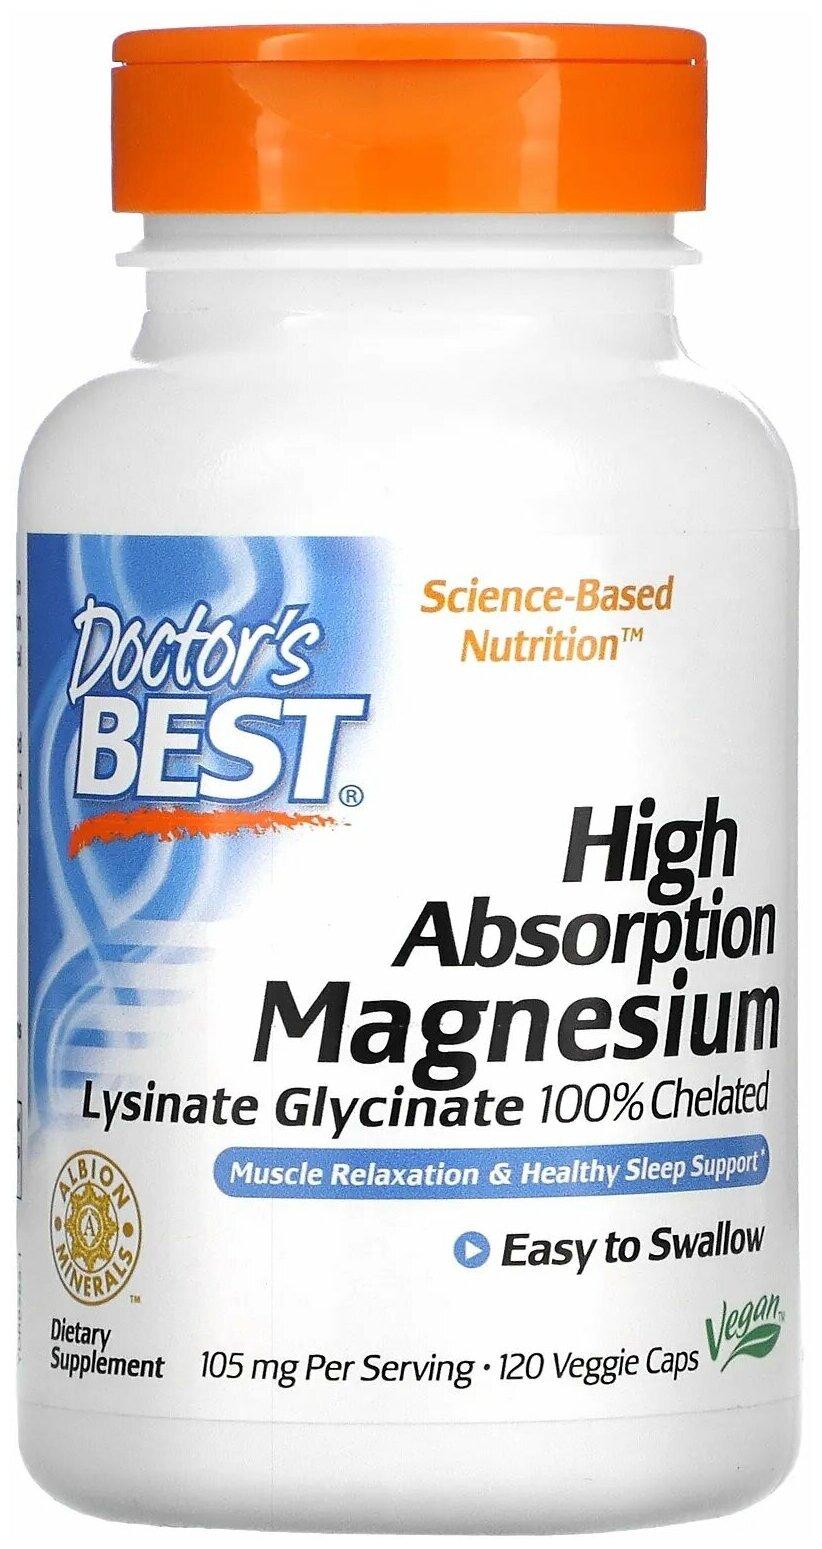 Капсулы Doctor's Best High Absorption Magnesium Chelated Lysinate Glycinate 105 мг, 140 г, 120 шт.